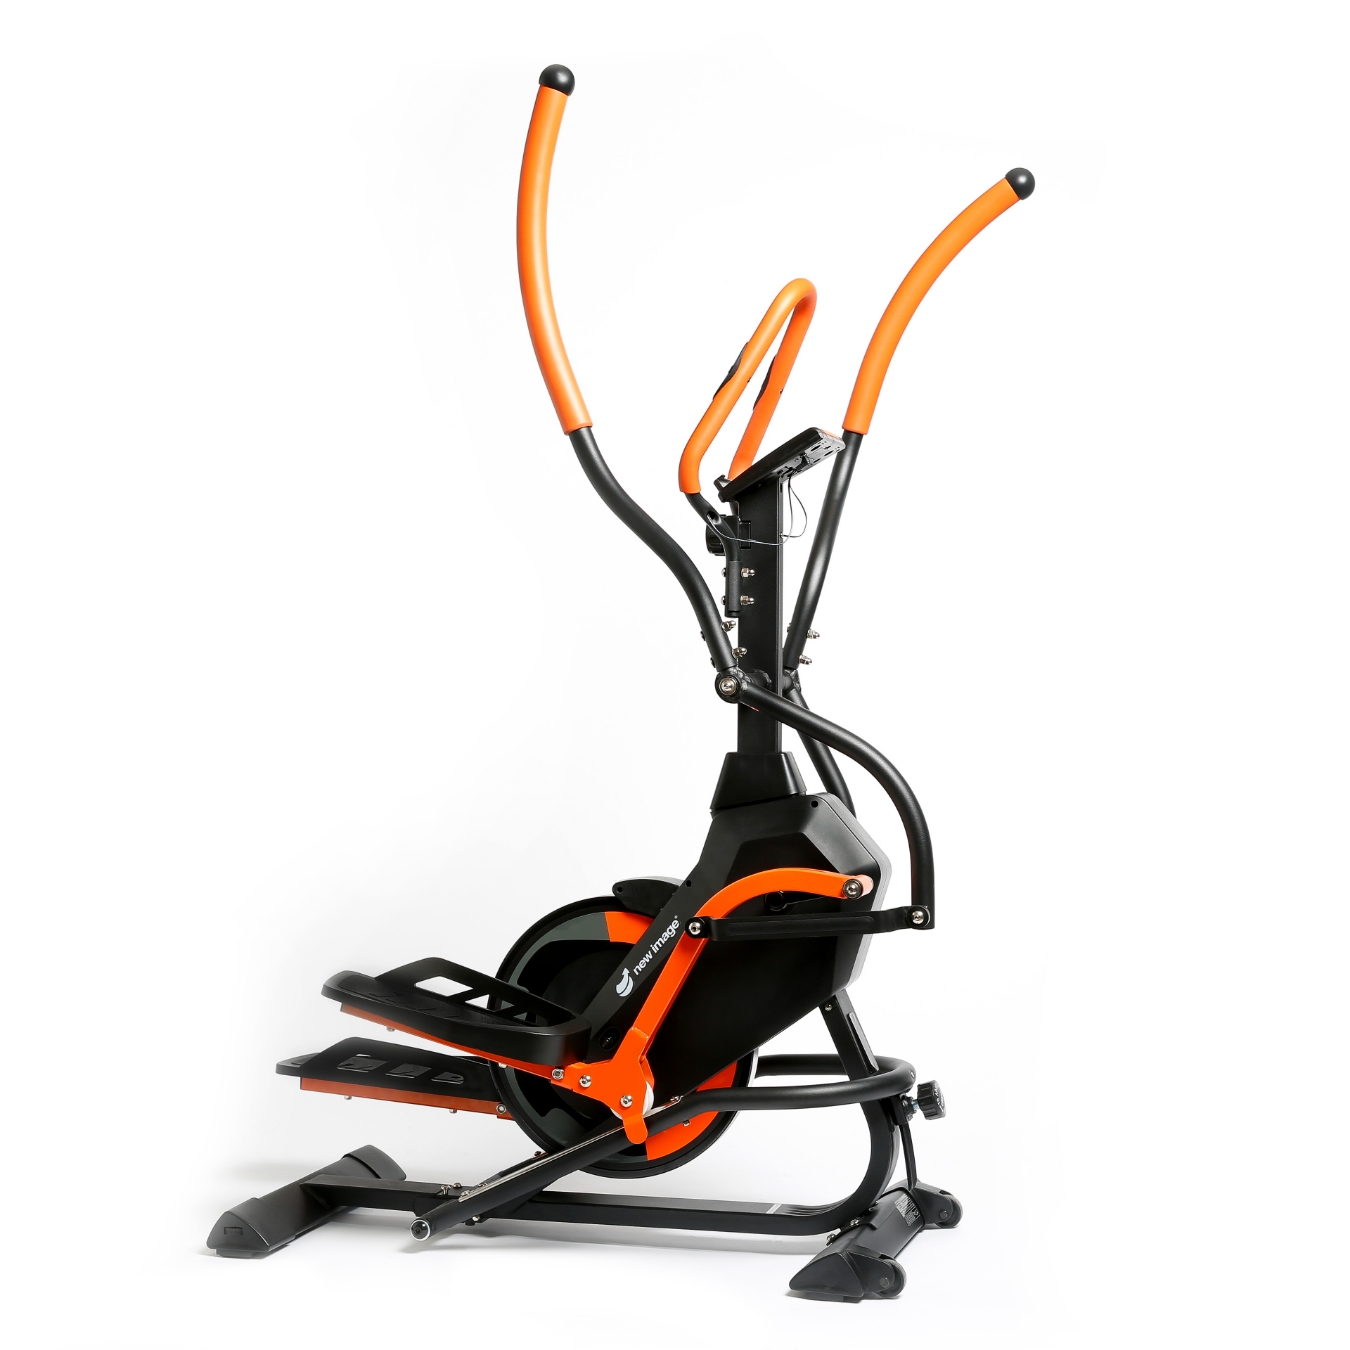 View FITT Strider Upright Elliptical Cross Trainer By New Image Fitness High Street TV information